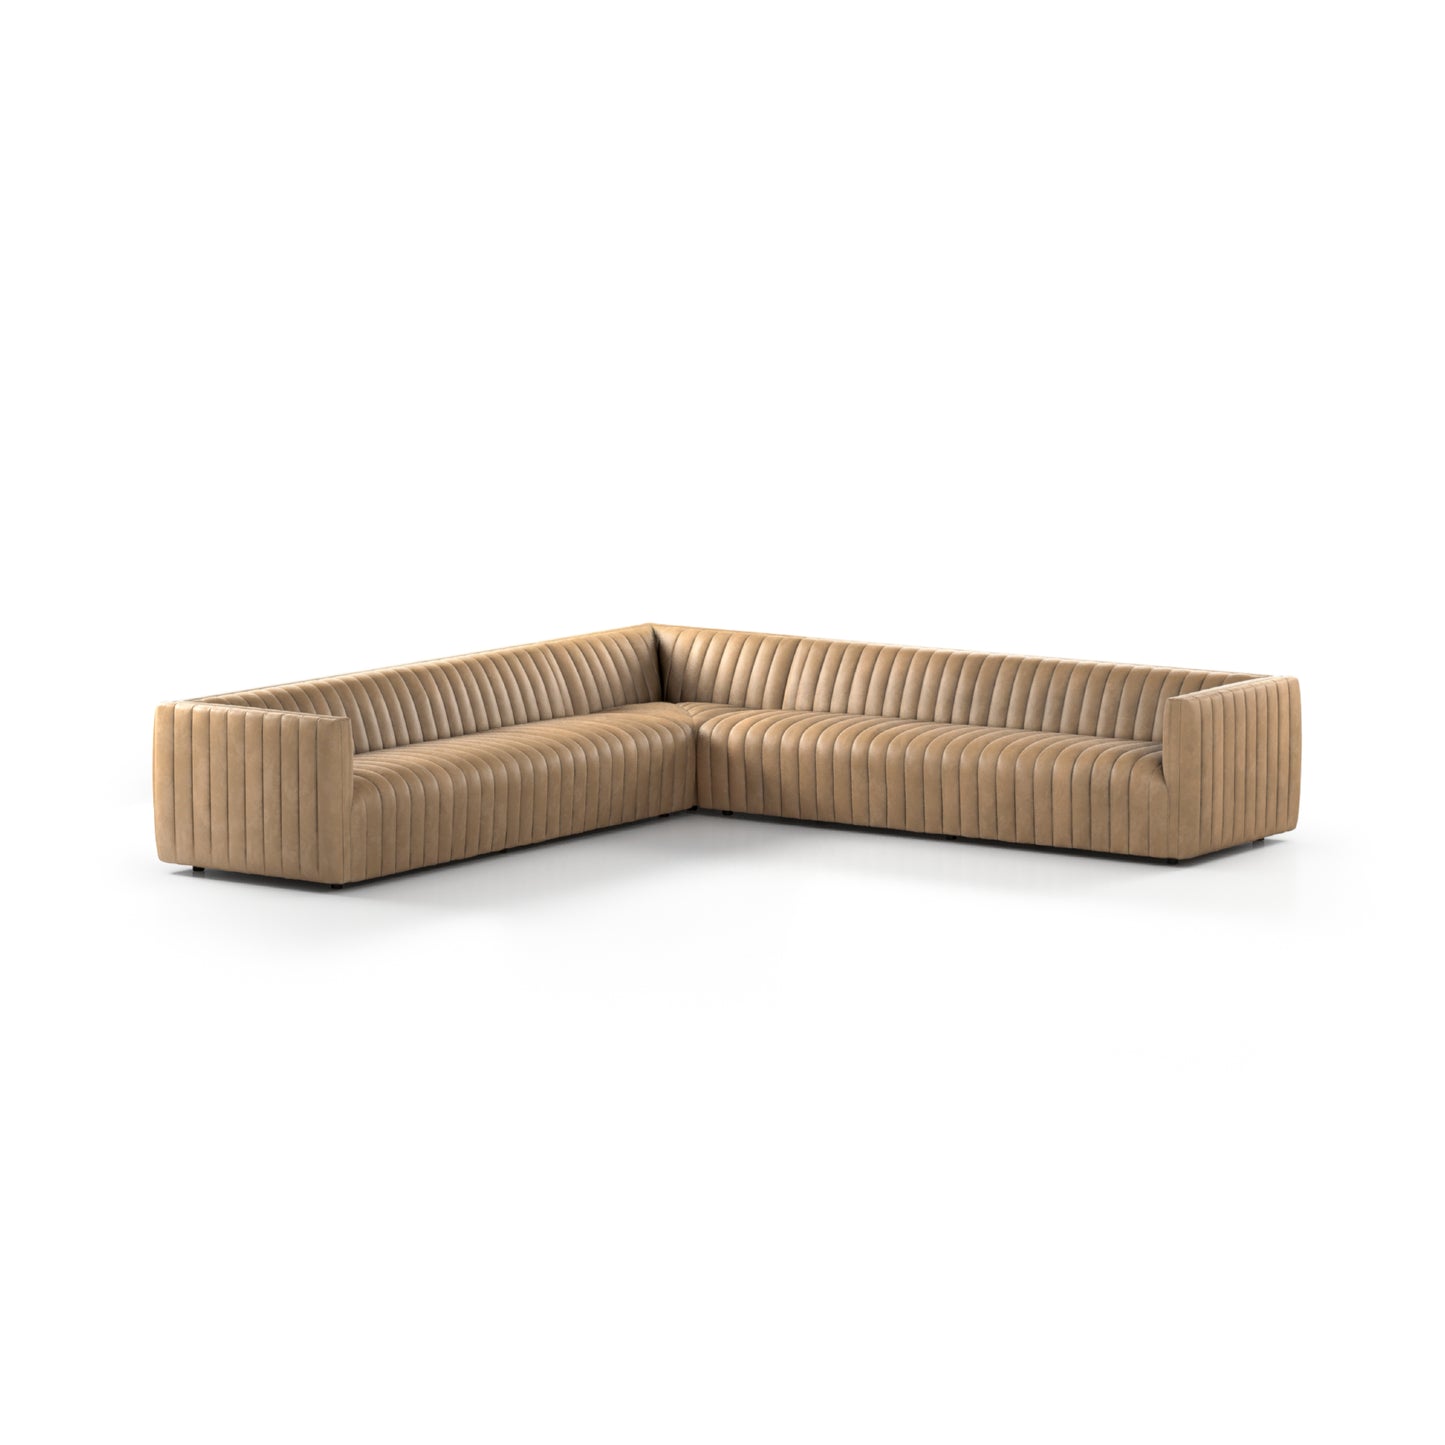 Augustine 3-PC Sectional 126" / Palermo DriftSectional Four Hands  126" Palermo Drift  Four Hands, Mid Century Modern Furniture, Old Bones Furniture Company, Old Bones Co, Modern Mid Century, Designer Furniture, https://www.oldbonesco.com/